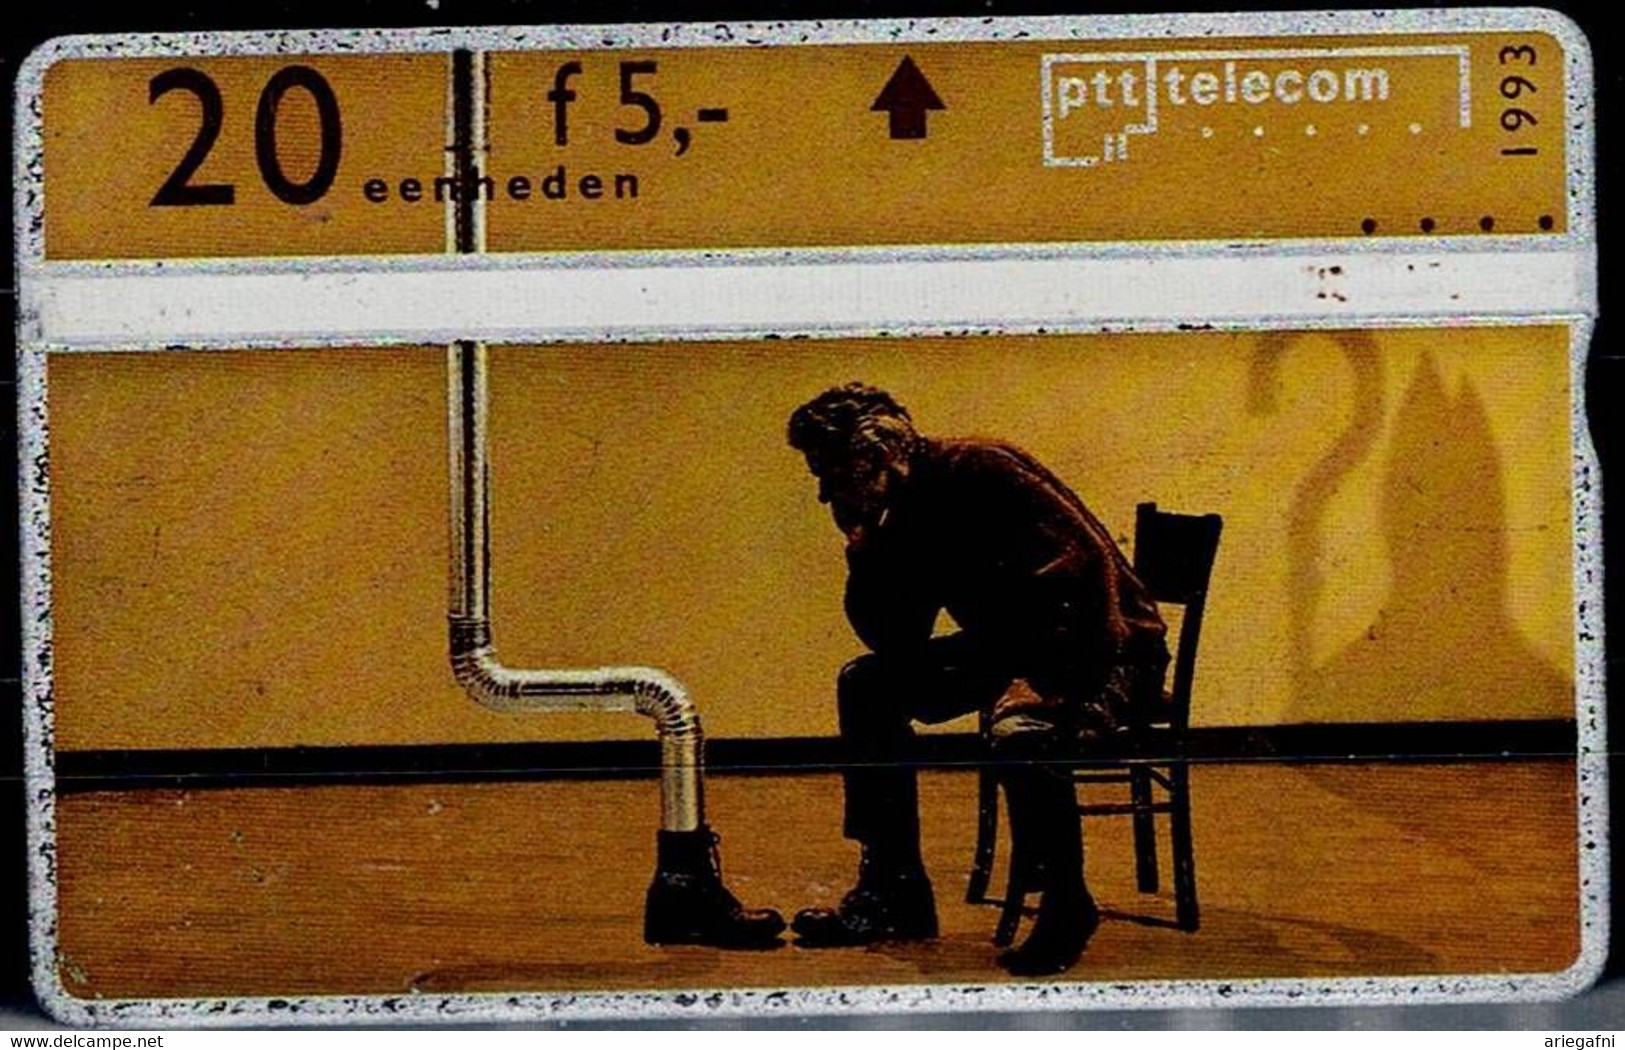 NETHERLANDS 1994 PHONECARD THINKER USED VF!! - Publiques